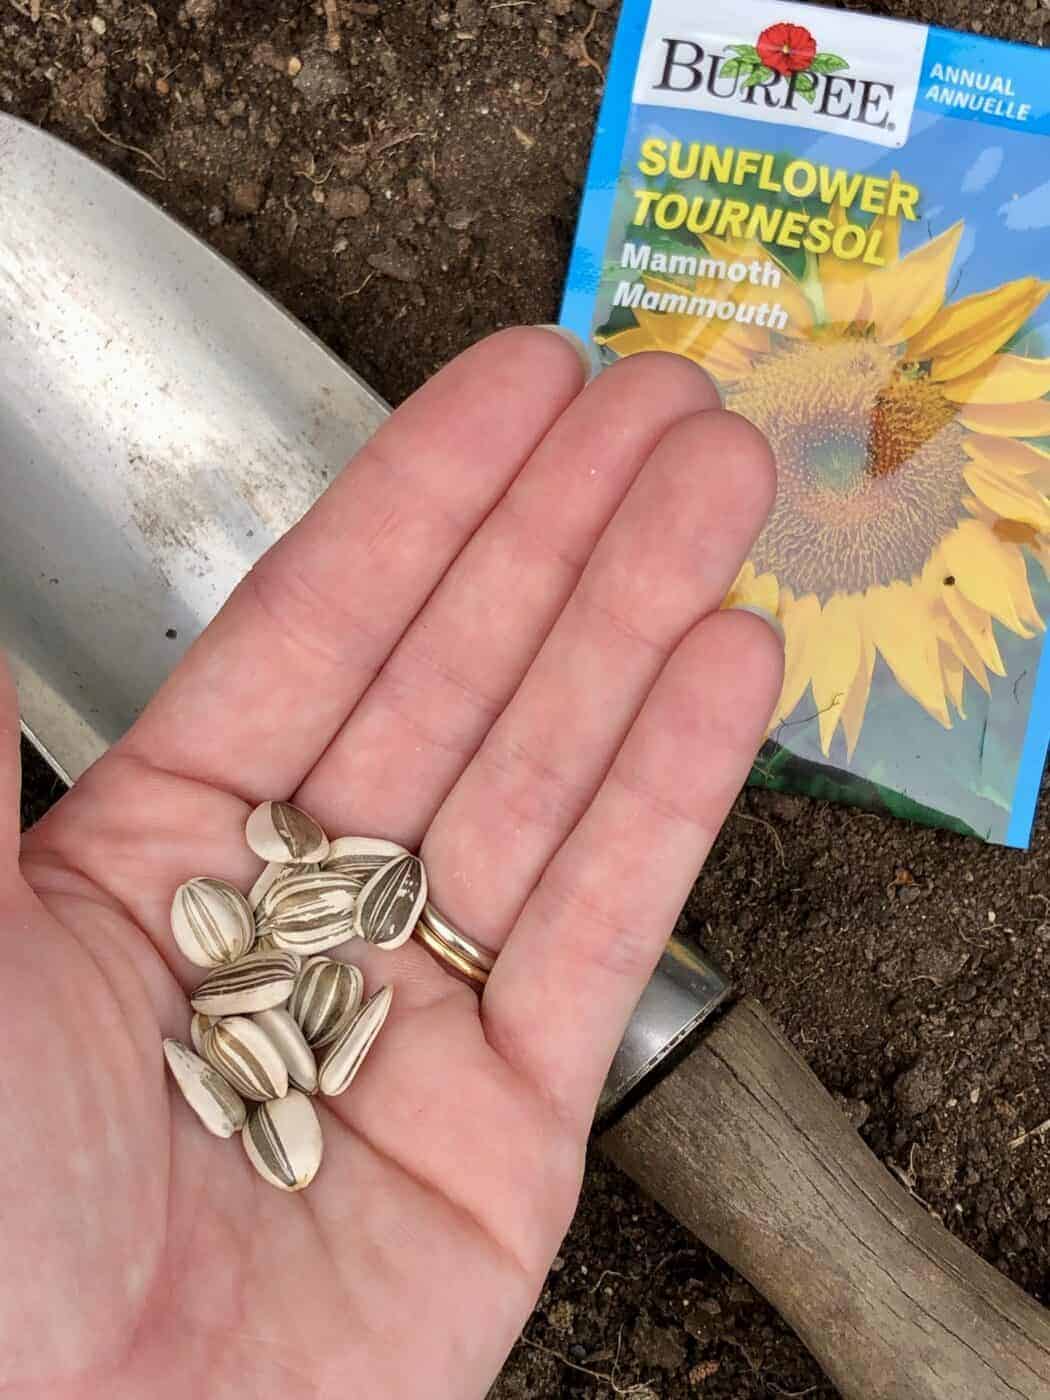 How to plant sunflowers from seeds